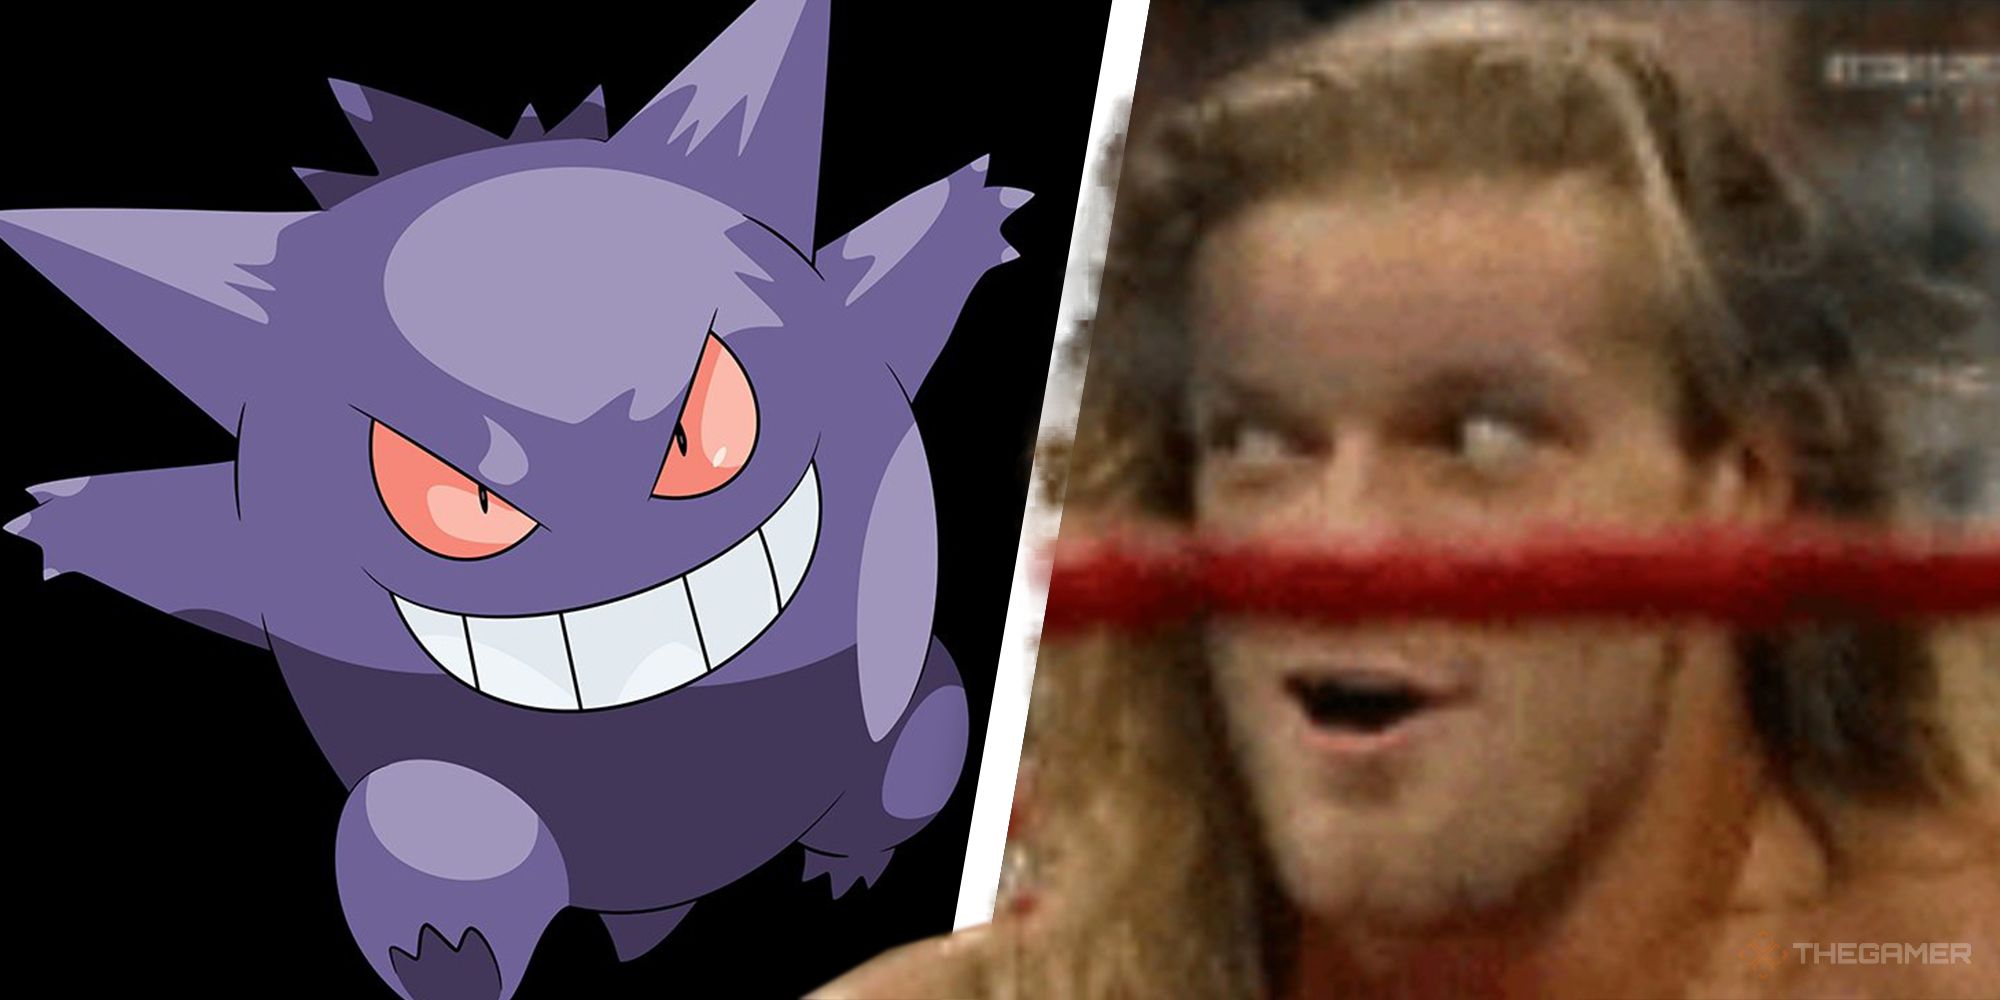 Heres 30 Wrestlers As Pokemon For The Royal Rumble (8)